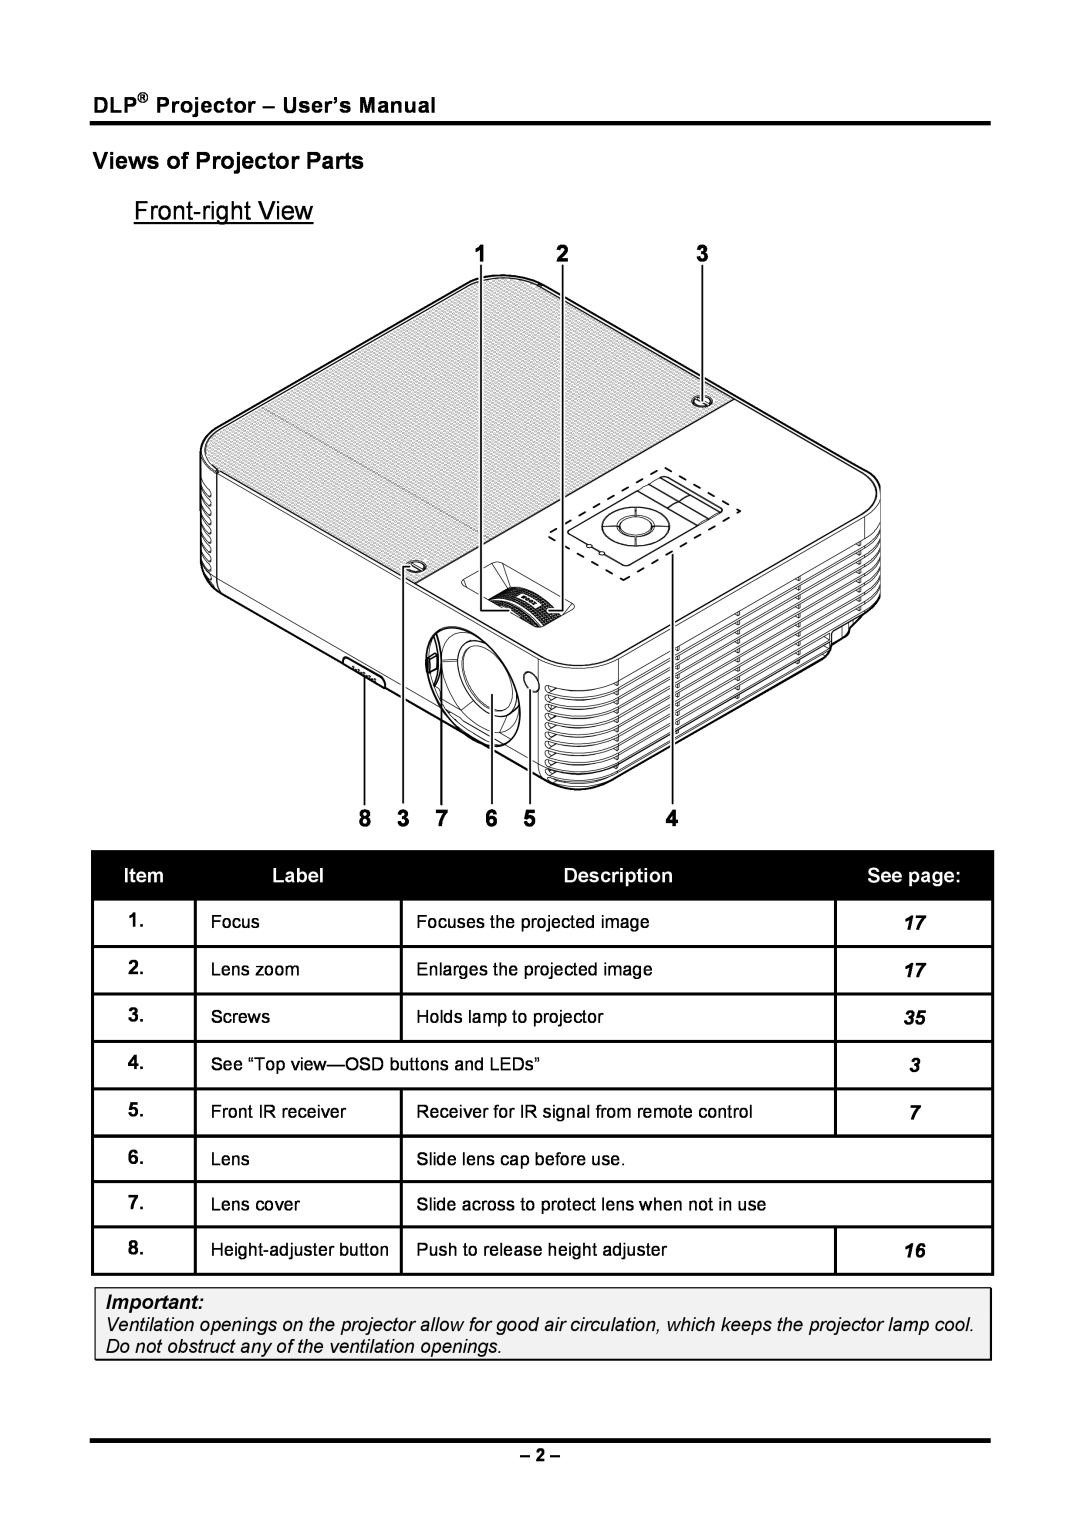 Planar PR5030 Front-right View, Views of Projector Parts, Label, Description, See page, DLP Projector - User’s Manual 